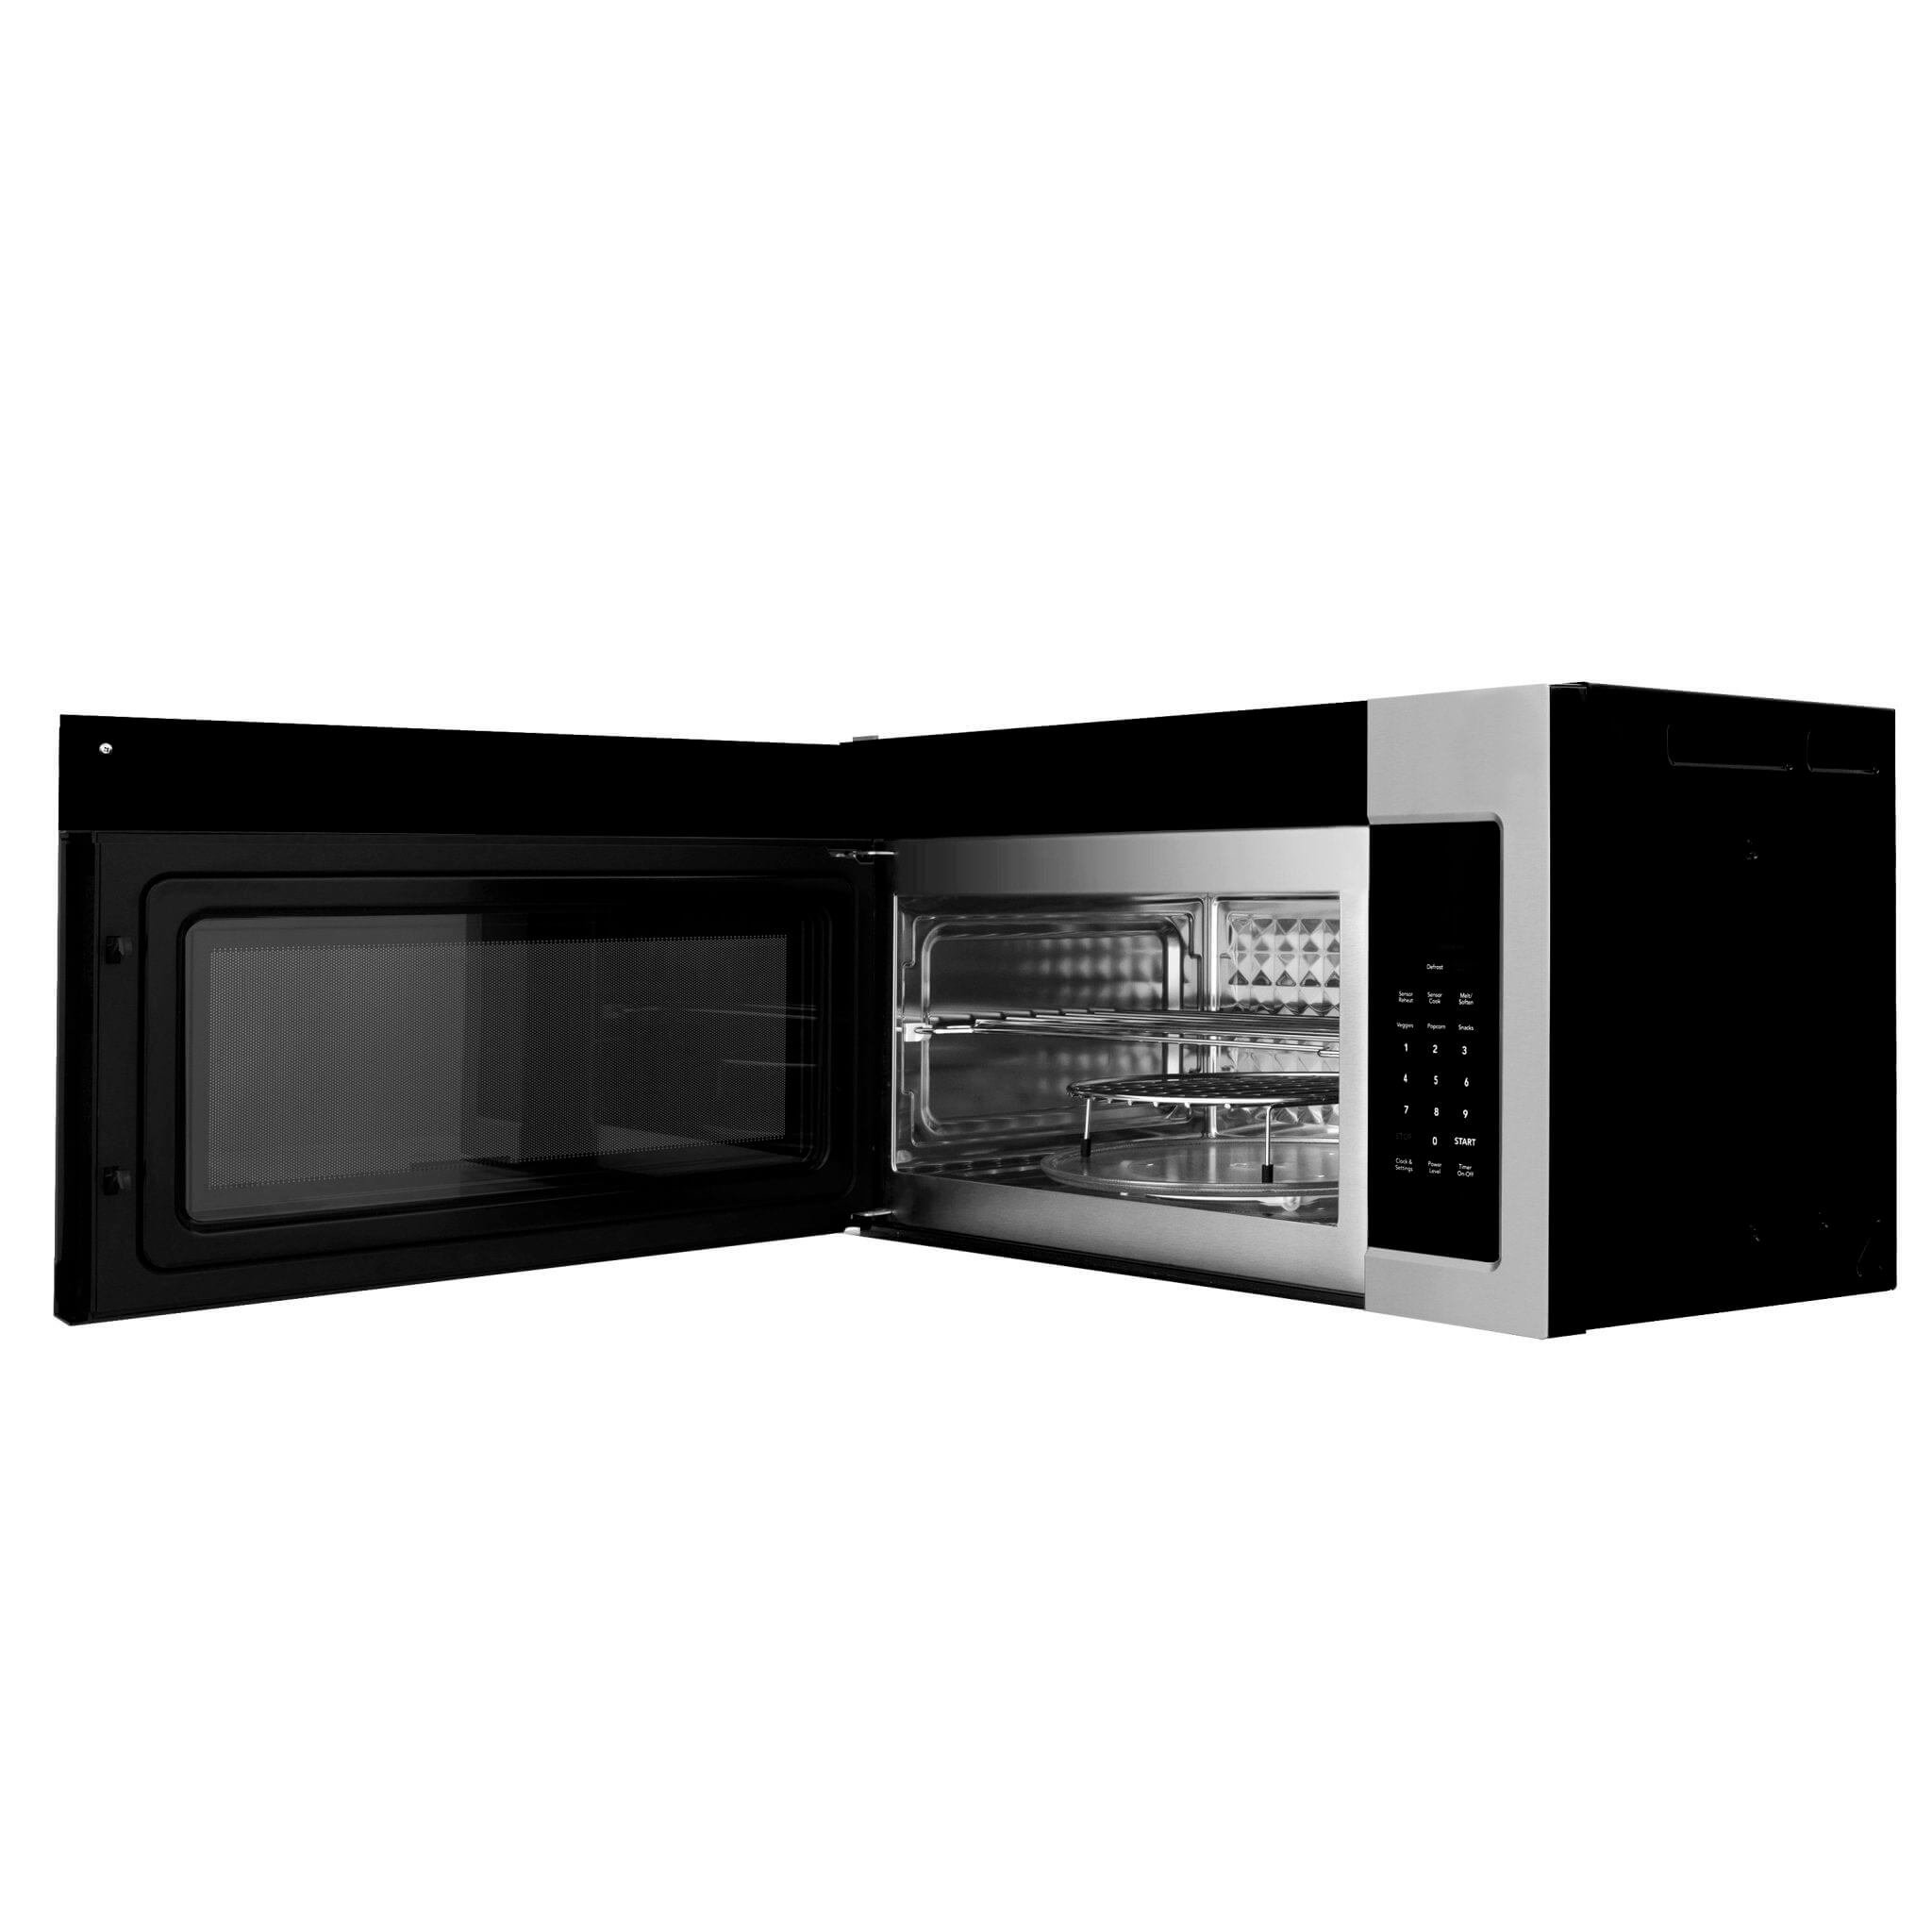 ZLINE Over the Range Microwave Oven in Stainless Steel & Black Stainless Steel with Modern Handle (MWO-OTR-H-30) - Microwave - ZLINE Kitchen and Bath